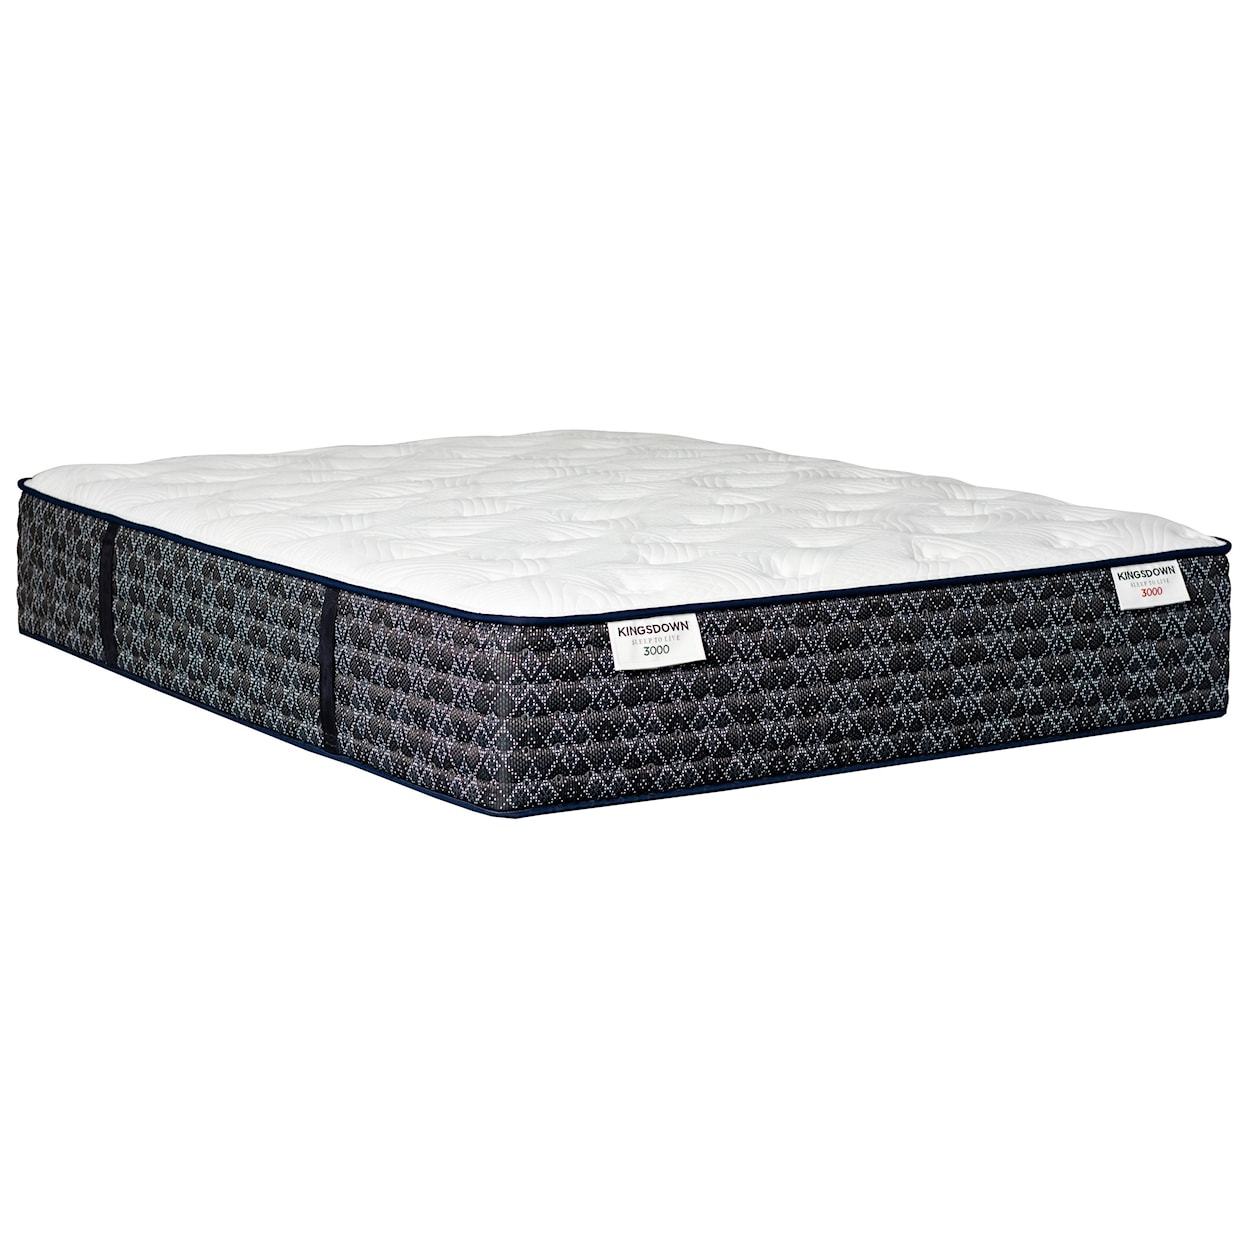 Kingsdown Sleep to Live 3000 Green Red King Pocketed Coil Mattress